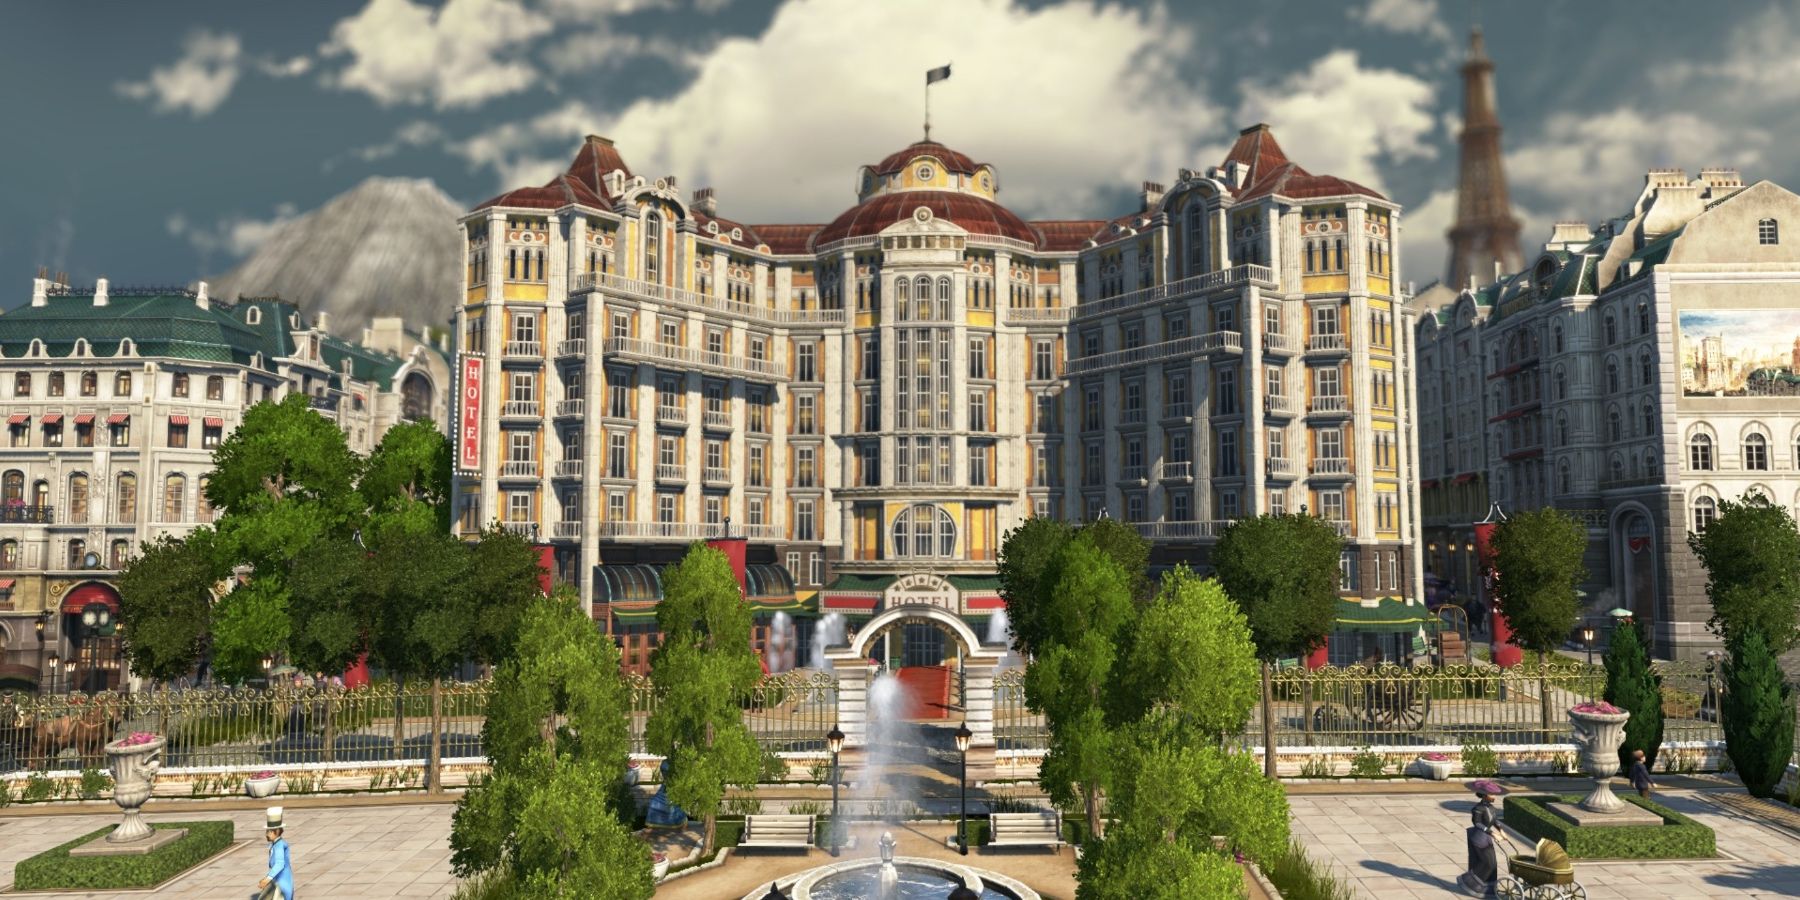 A city building which is very beautiful, with trees and fountains in the street outside